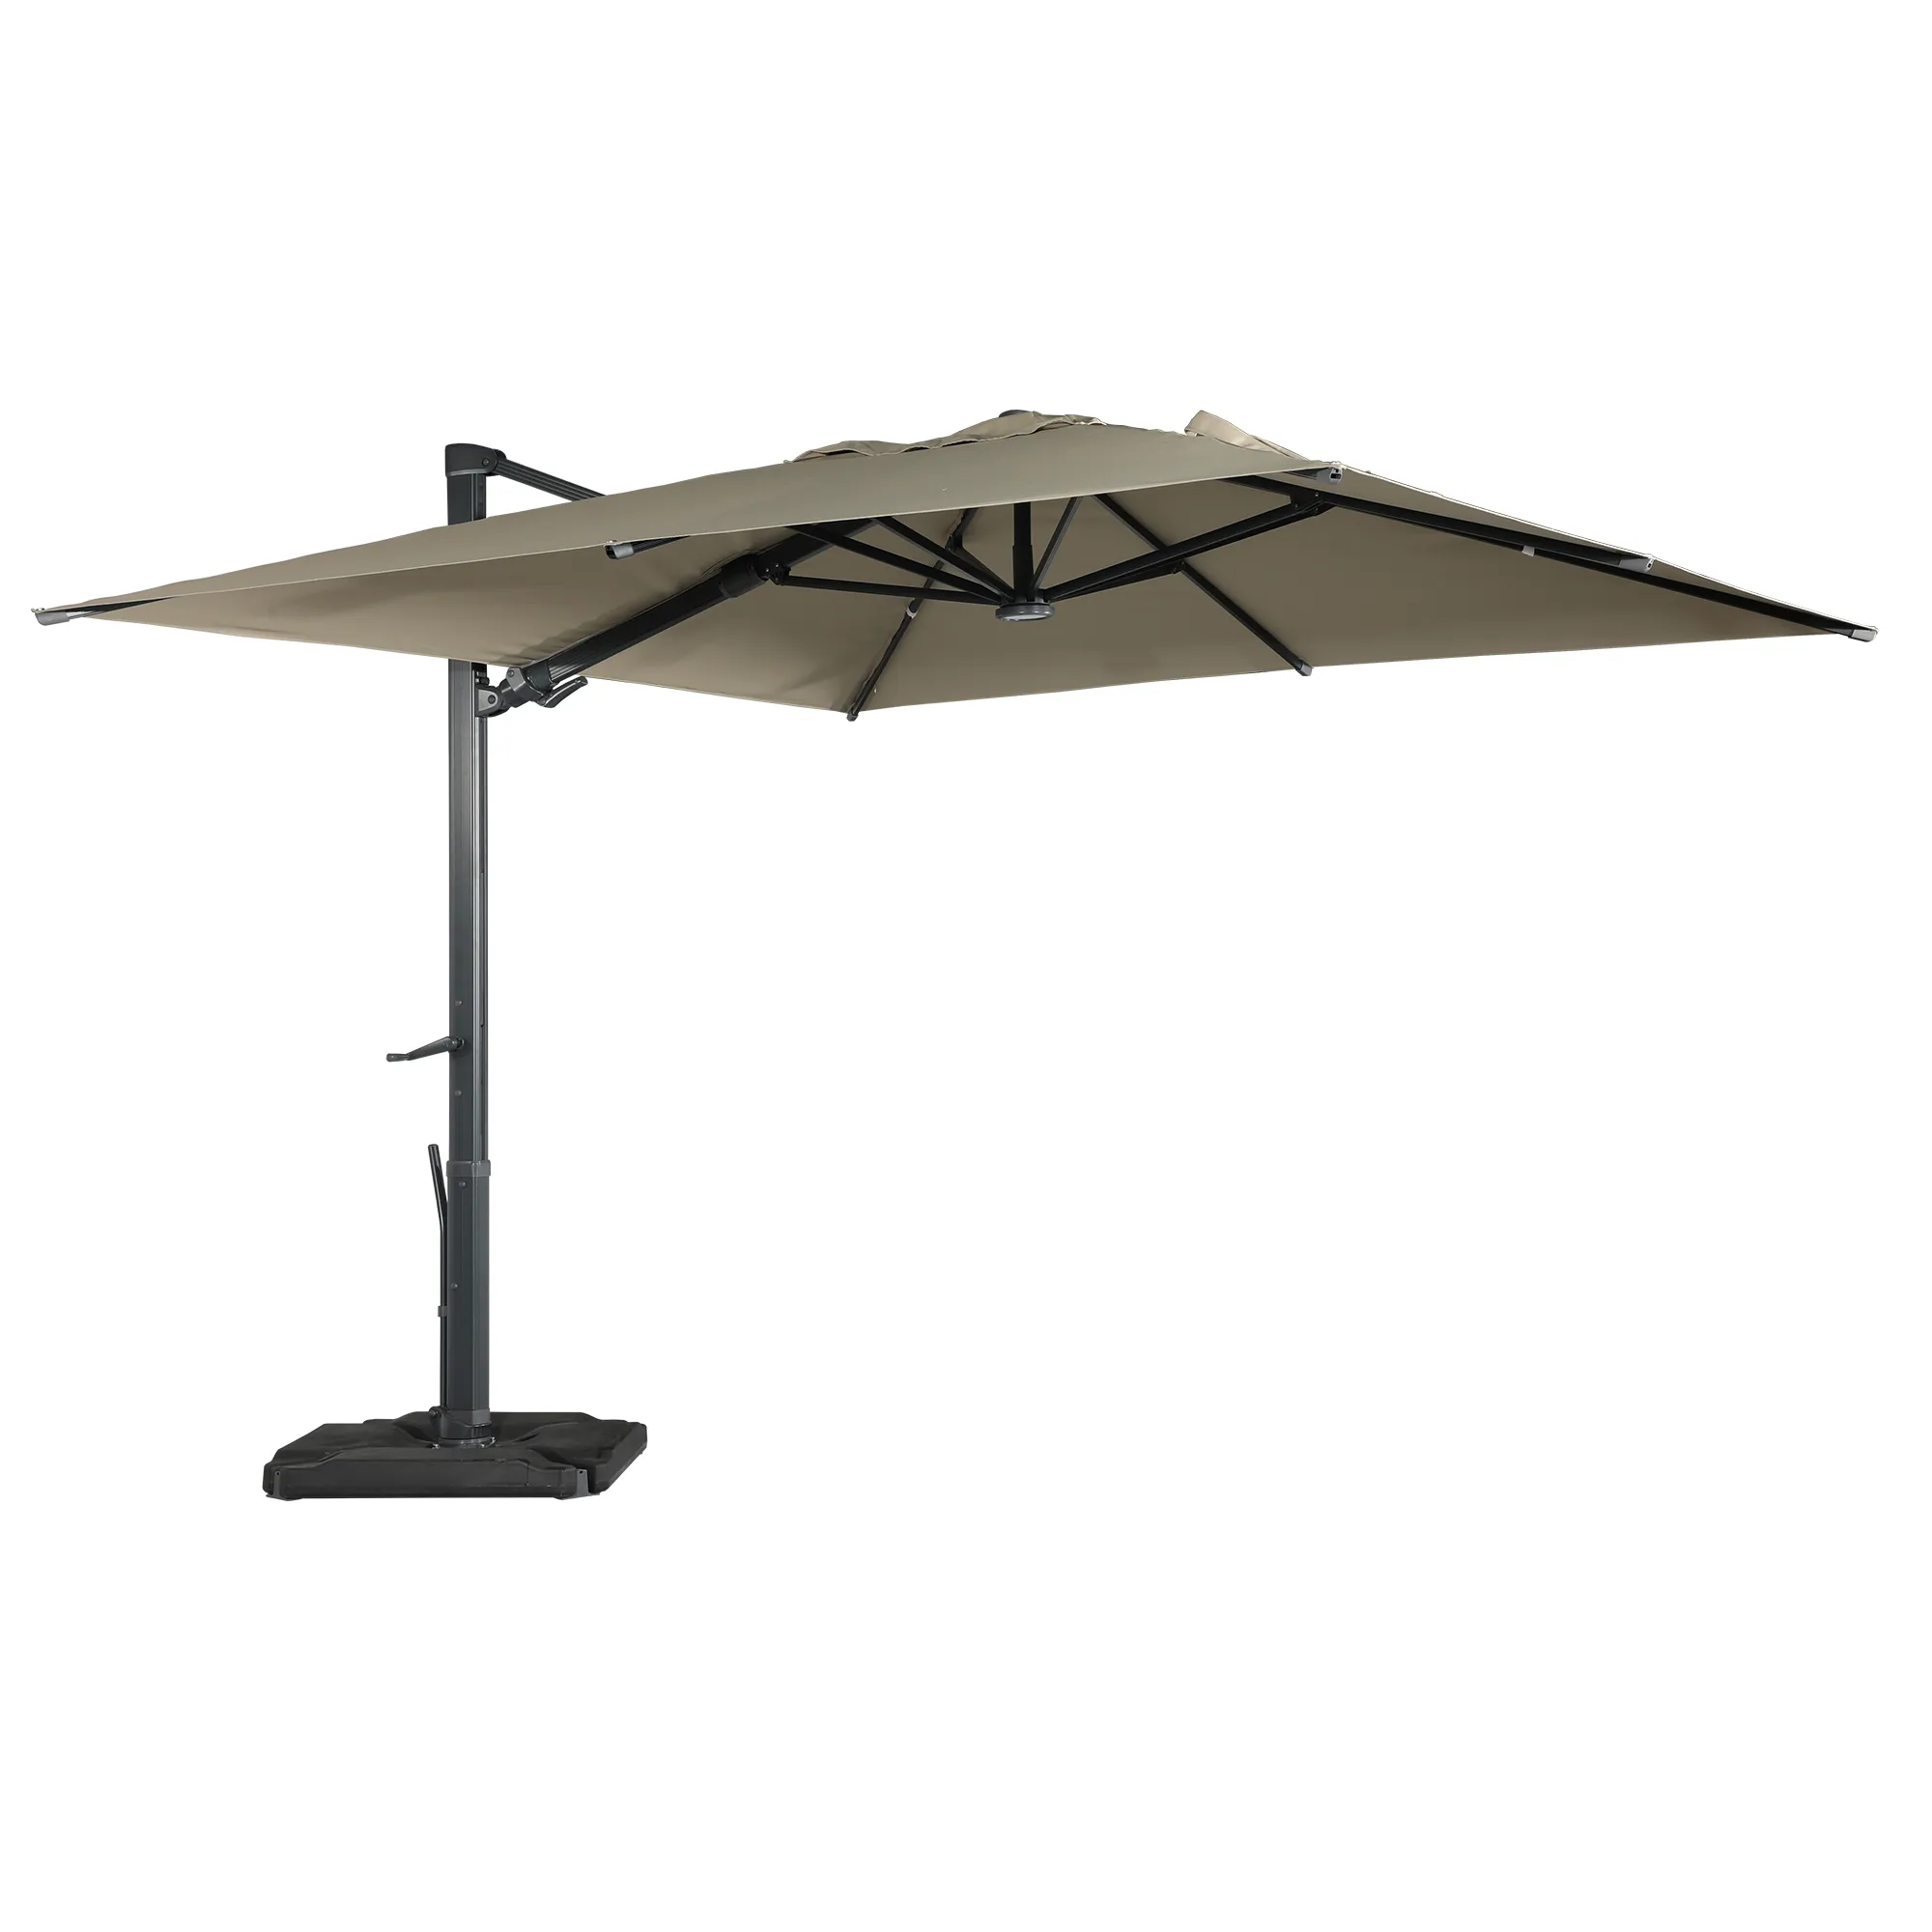 MONDAWE 10ft Square Cantilever Solar LED Umbrella with Included Base Stand for Outdoor Sun Shade